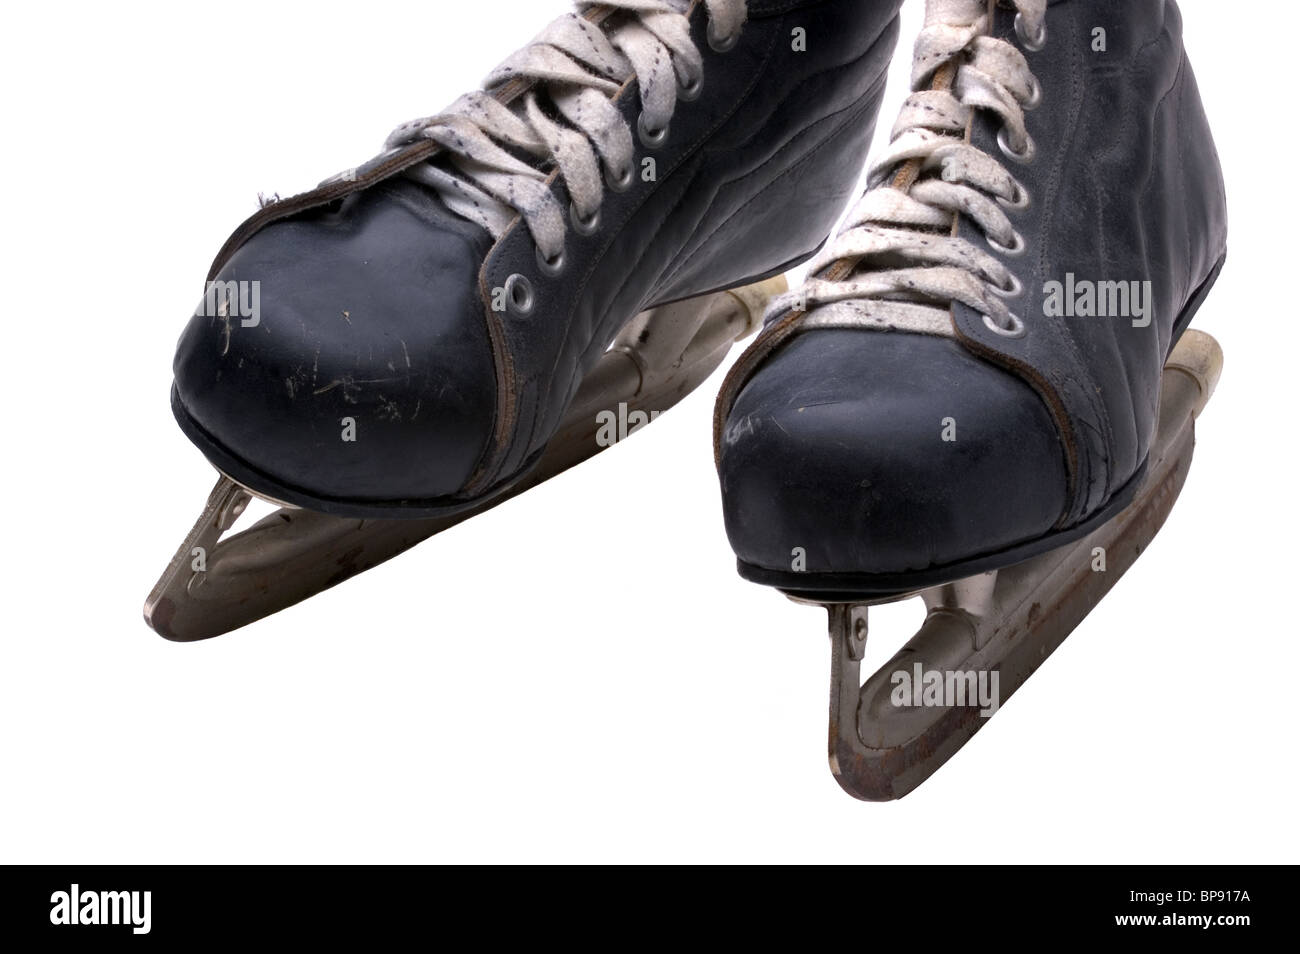 Old Fashioned Men's Ice Hockey Skates Isolated On A White